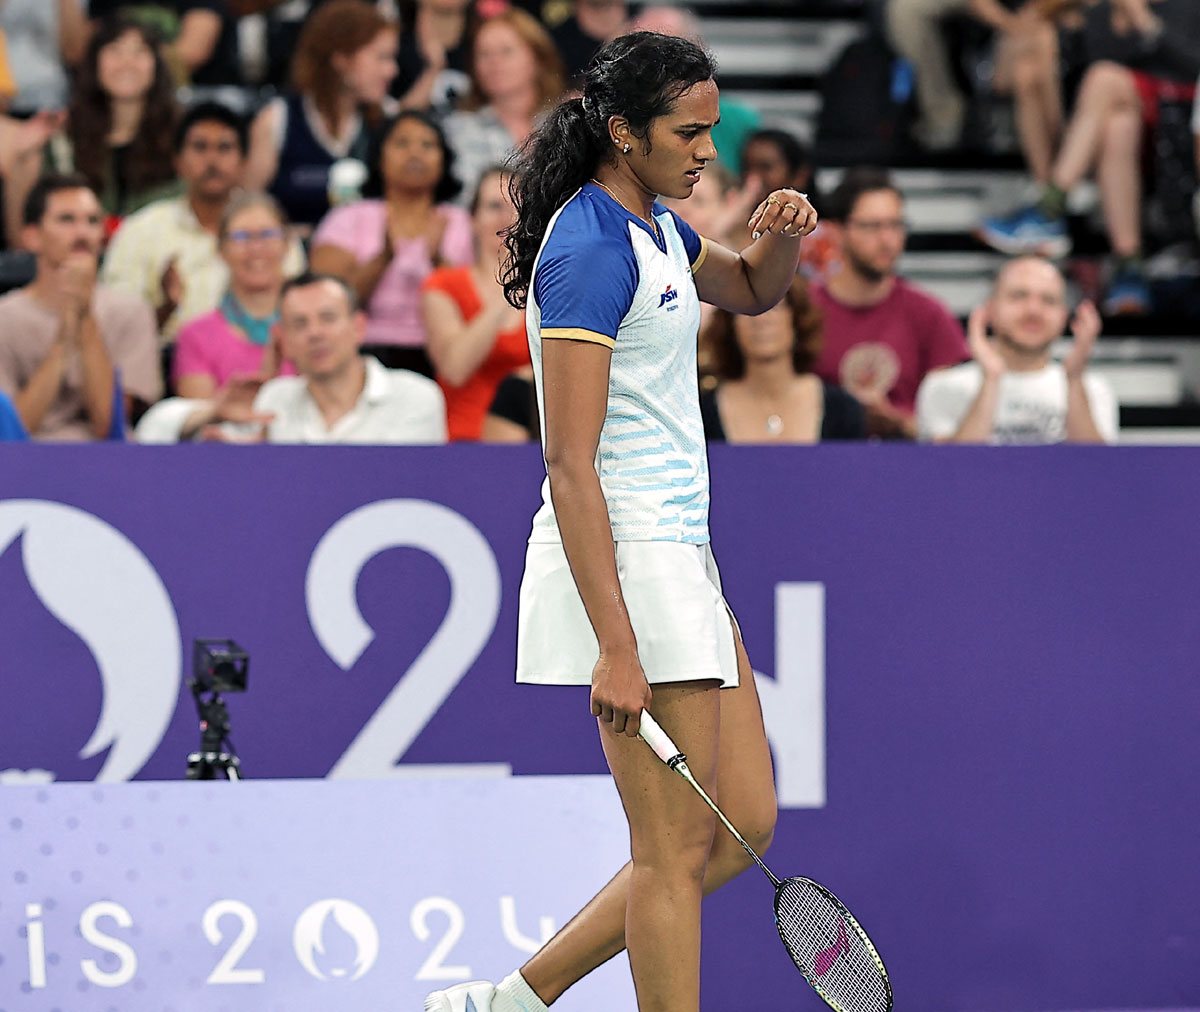 India's PV reacts during her Olympics women's singles Round of 16 match against China's Bing Jiao He at Porte de La Chapelle Arena, Paris, on Thursday. 